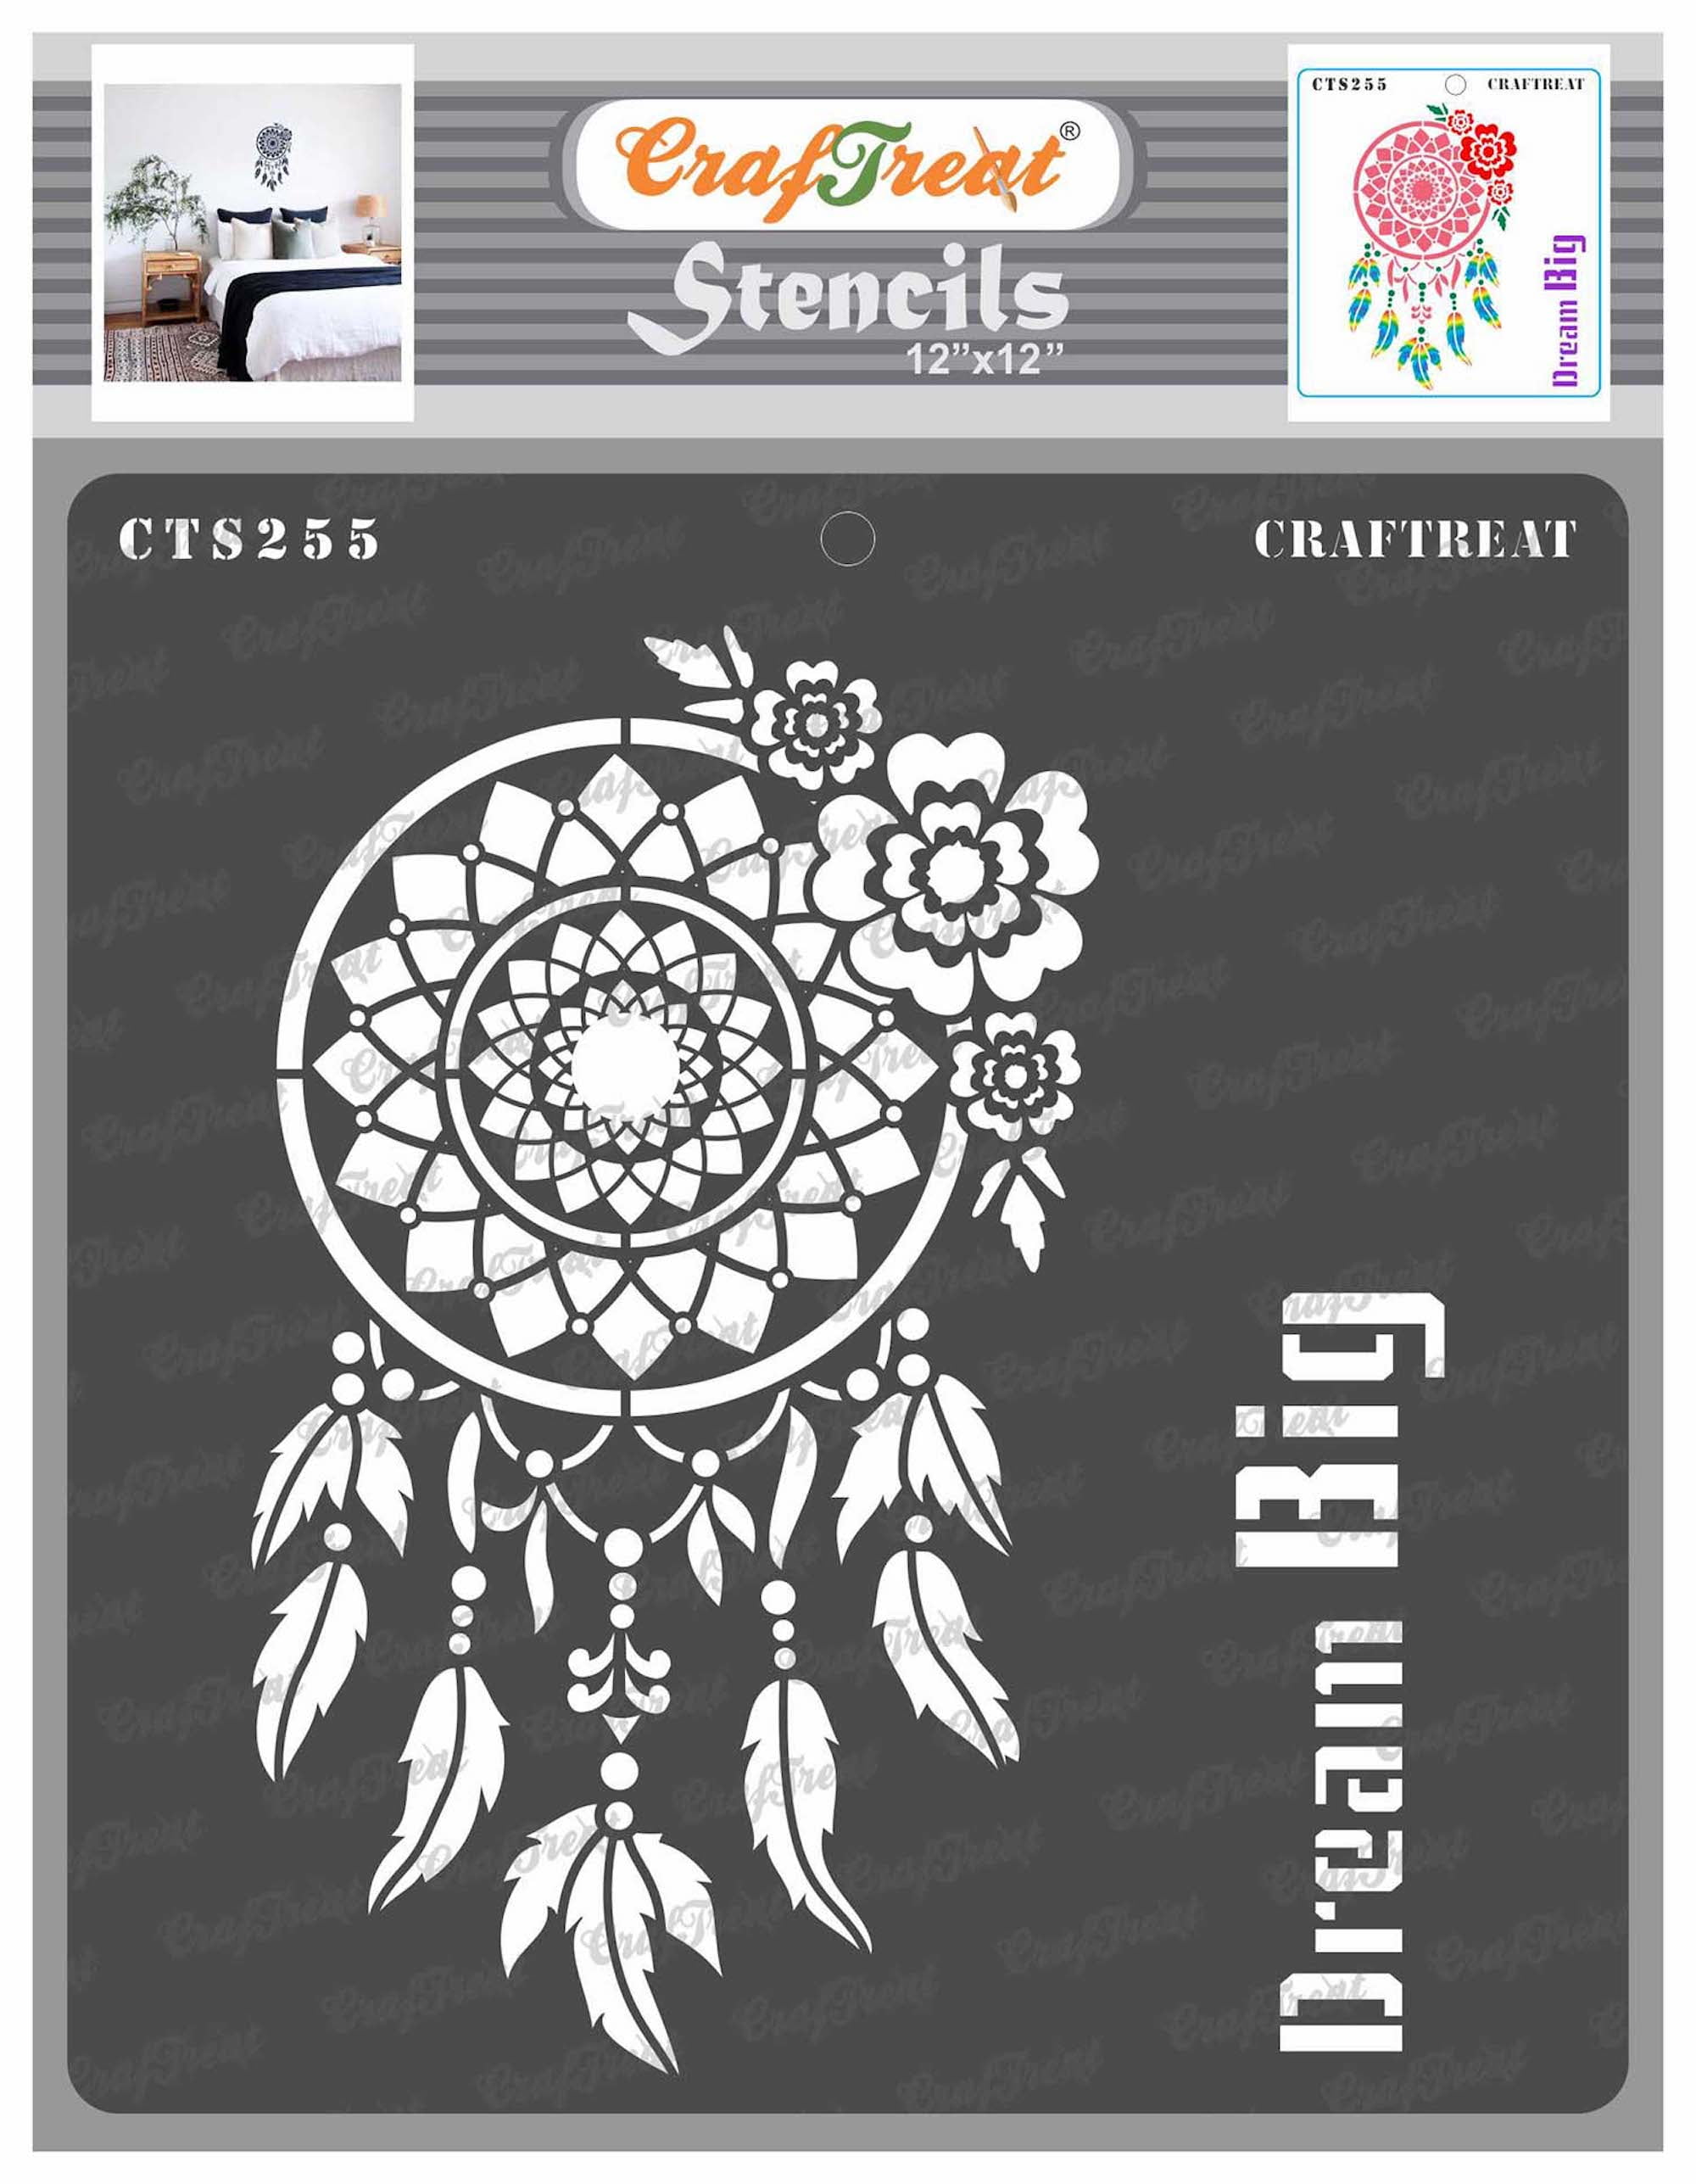 Stencil for Crafts with Patterns for Bullet Journal int!rend 20 Pieces Stencil Set Photo Album Drawing Stencils Made of Plastic DIY Gift Cards Scrapbooking 